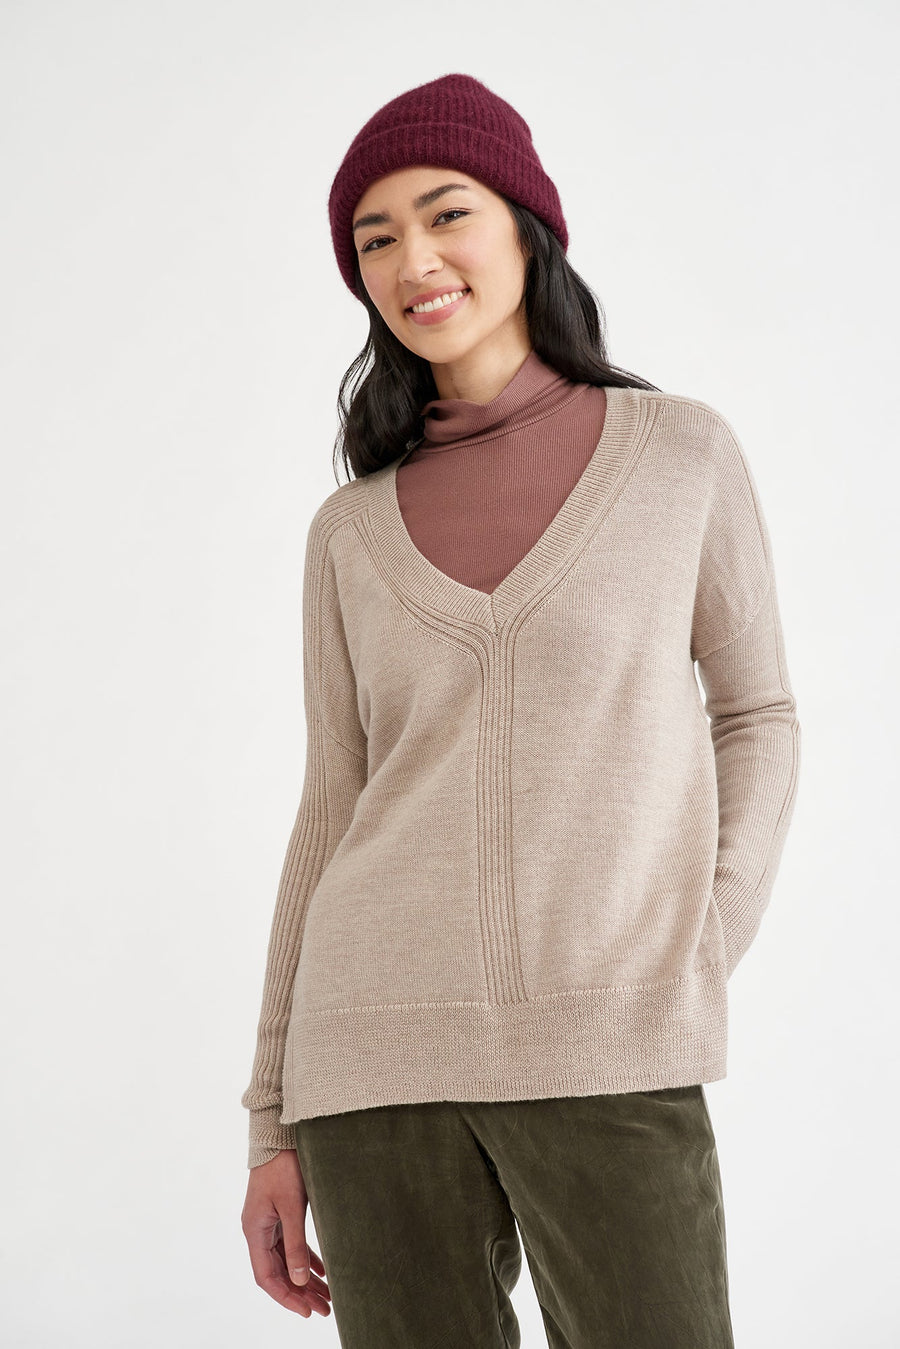 Normandy Sweater - Oatmeal - ReAmour